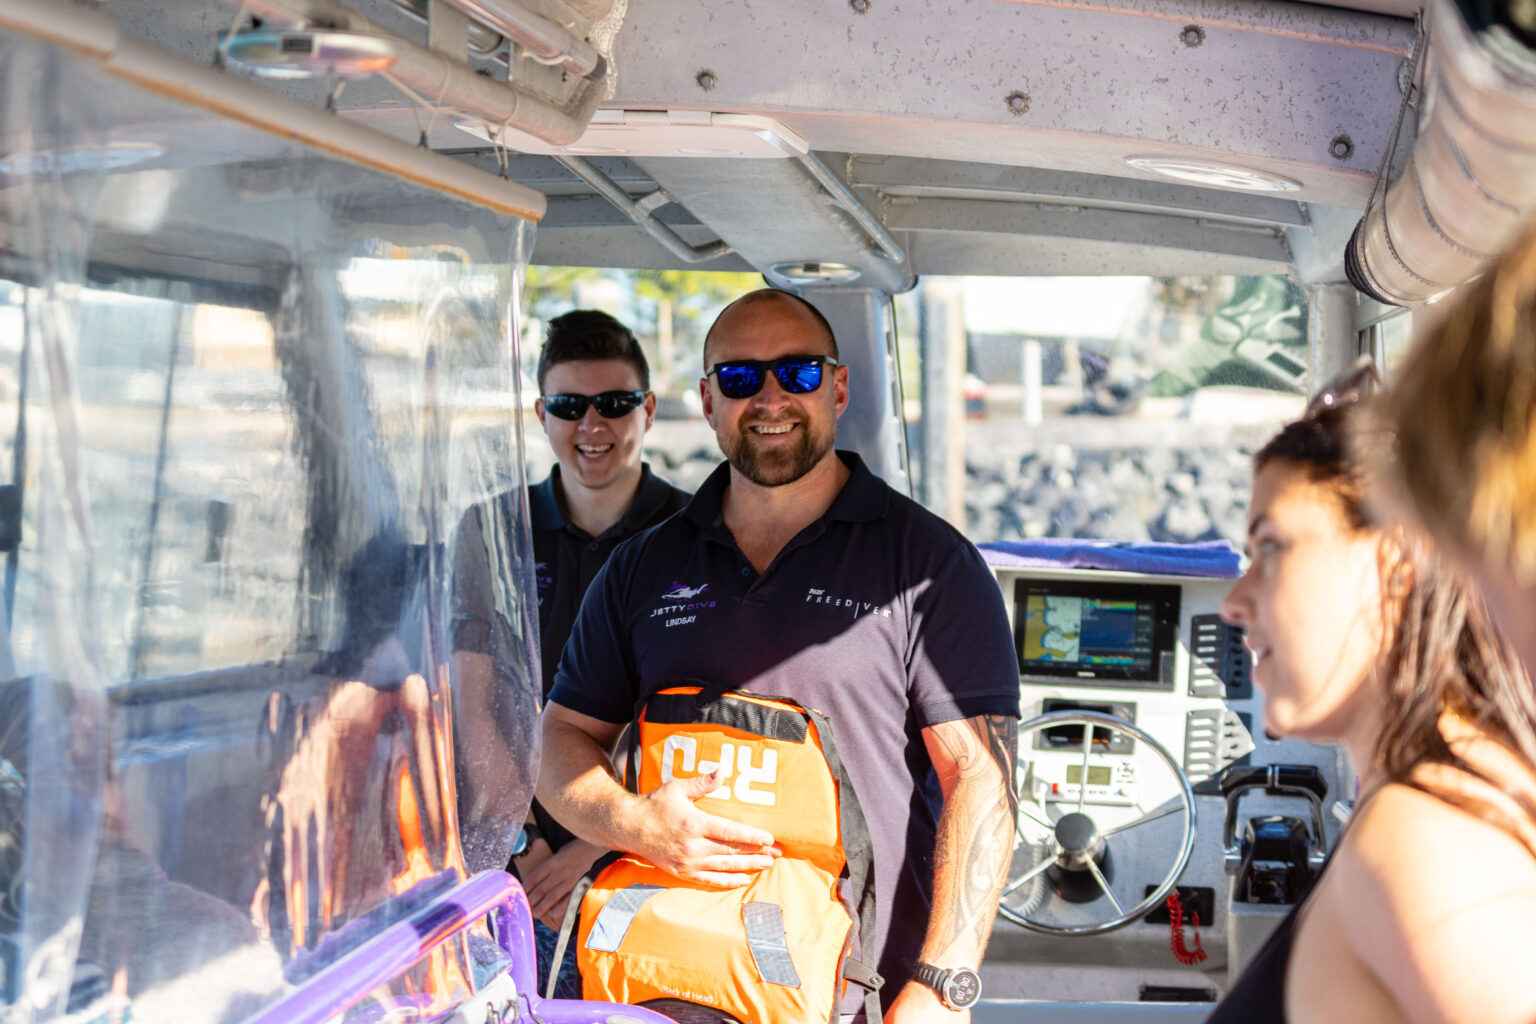 It's The Fun And Friendly Crew That Make Jetty Dive One Of The Most Popular Dive Destinations On The East Coast Of Australia